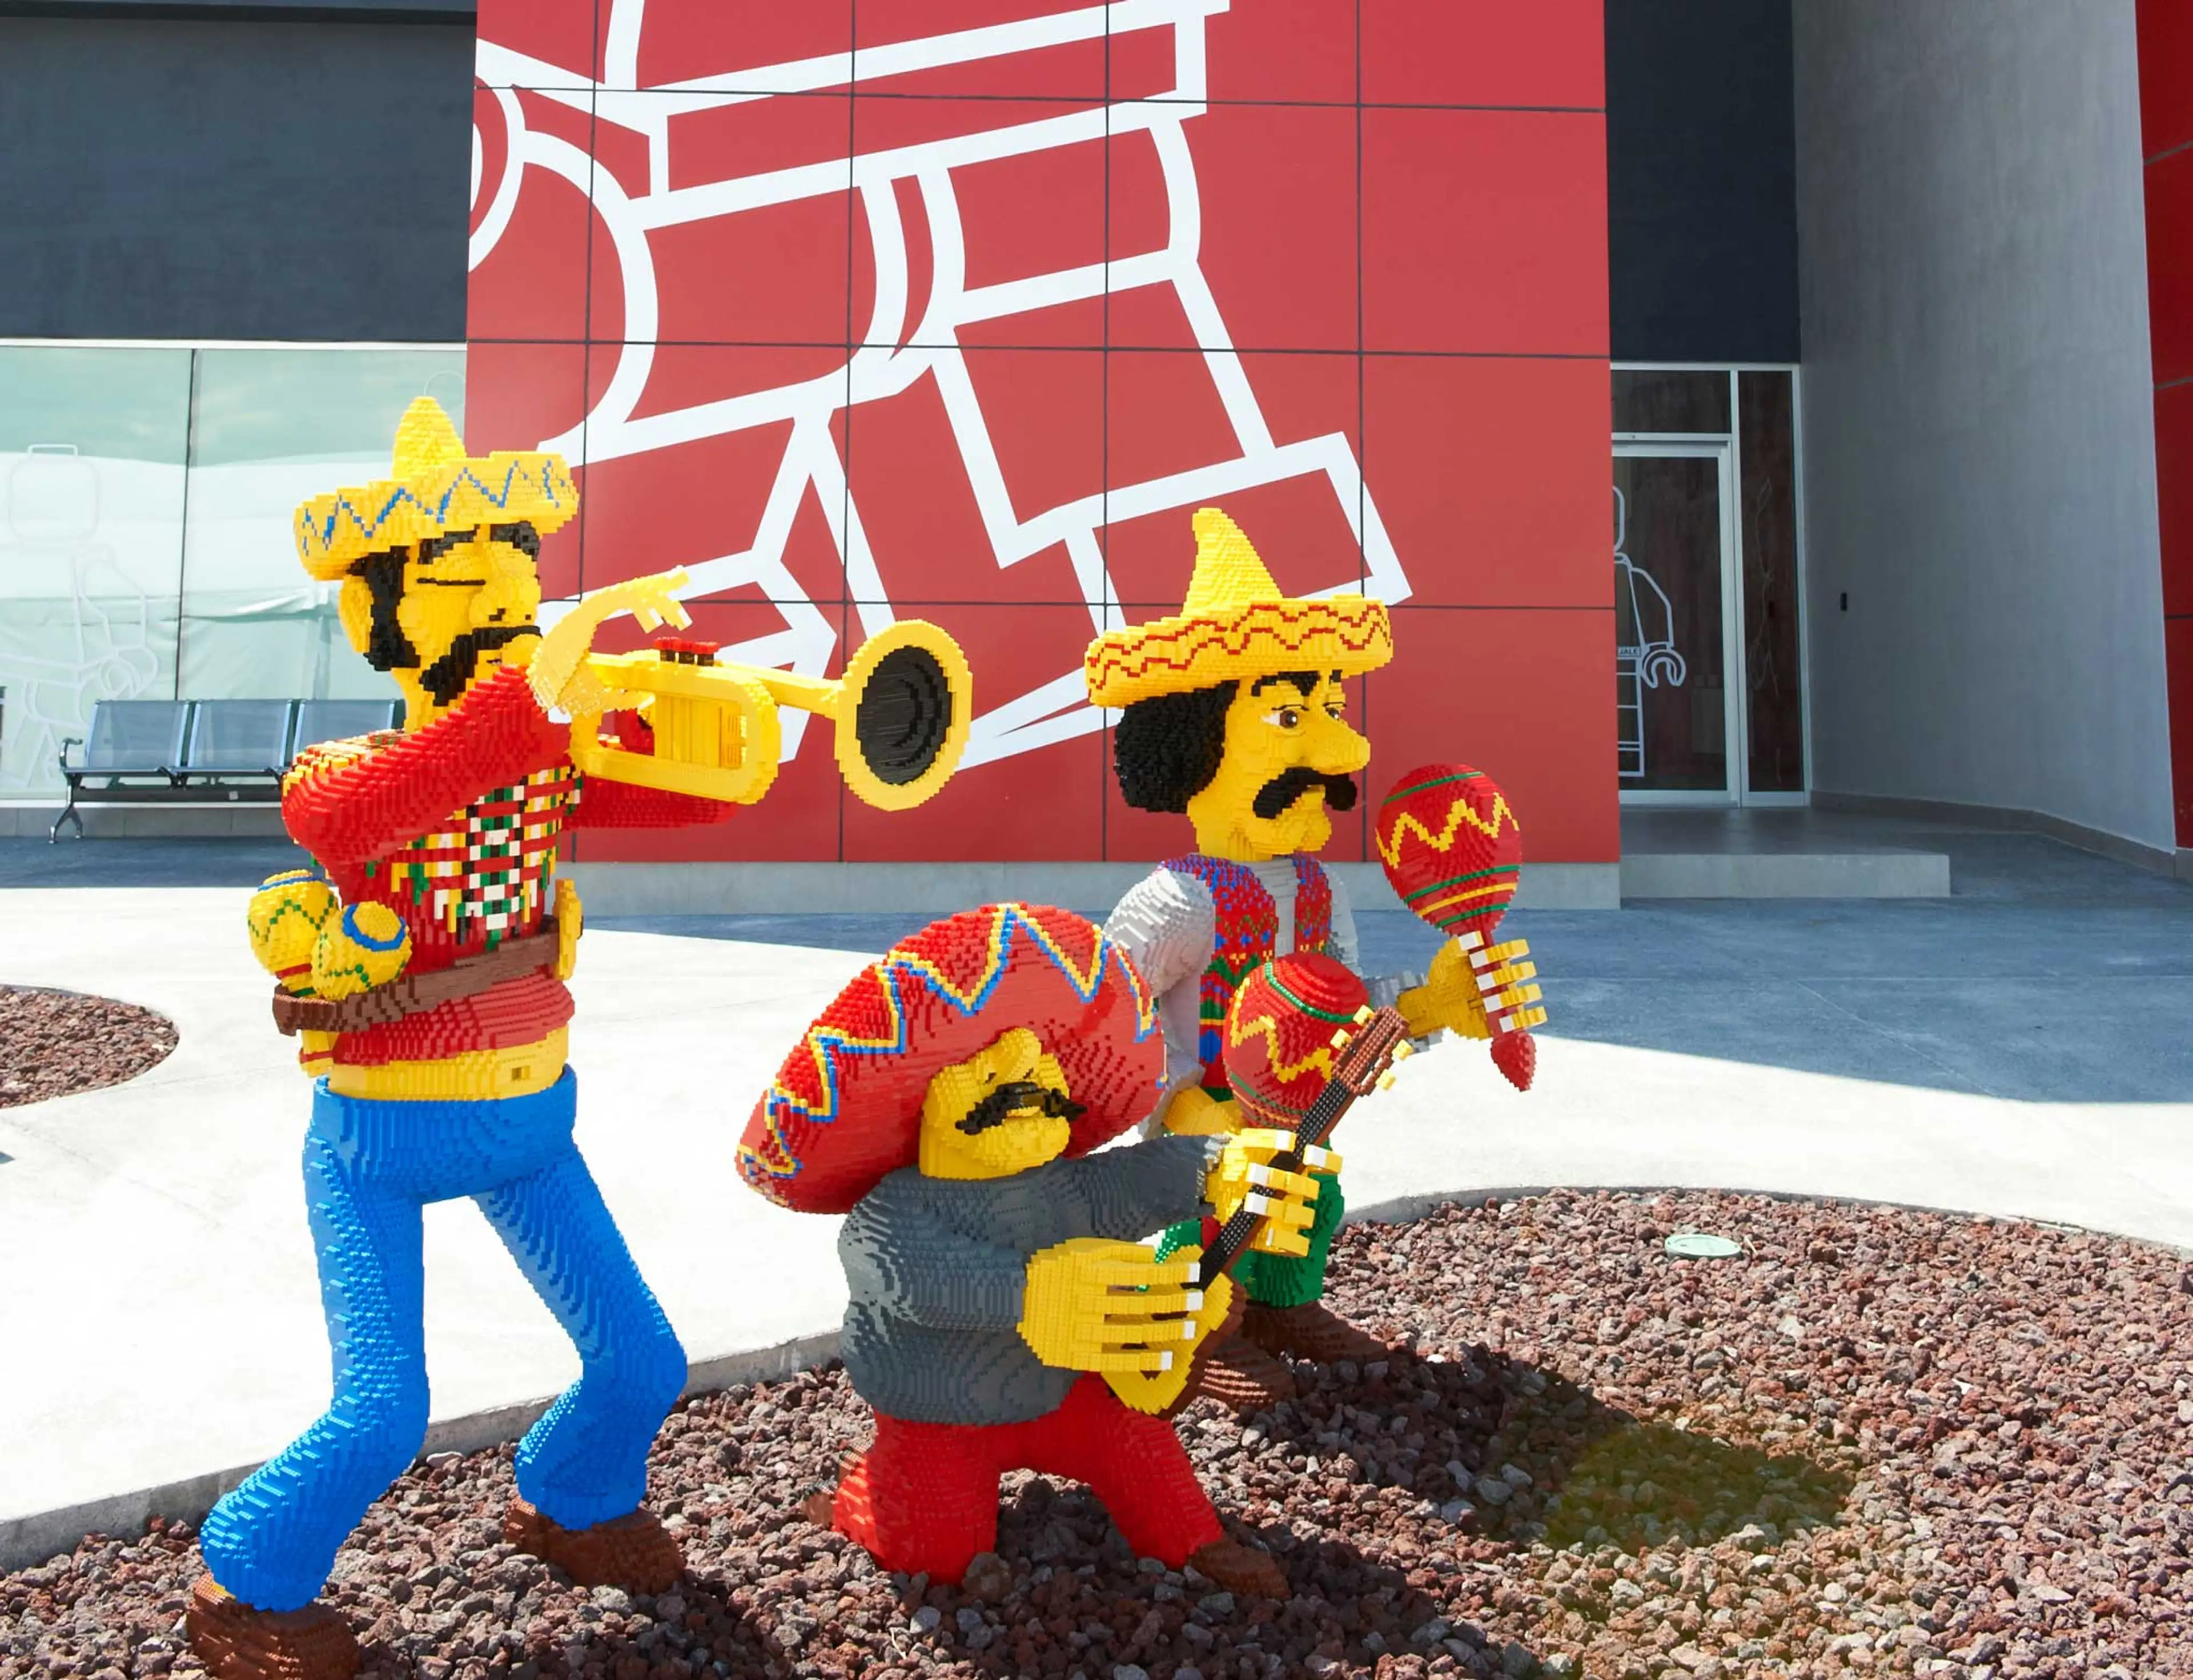 LEGO models outside factory in Mexico